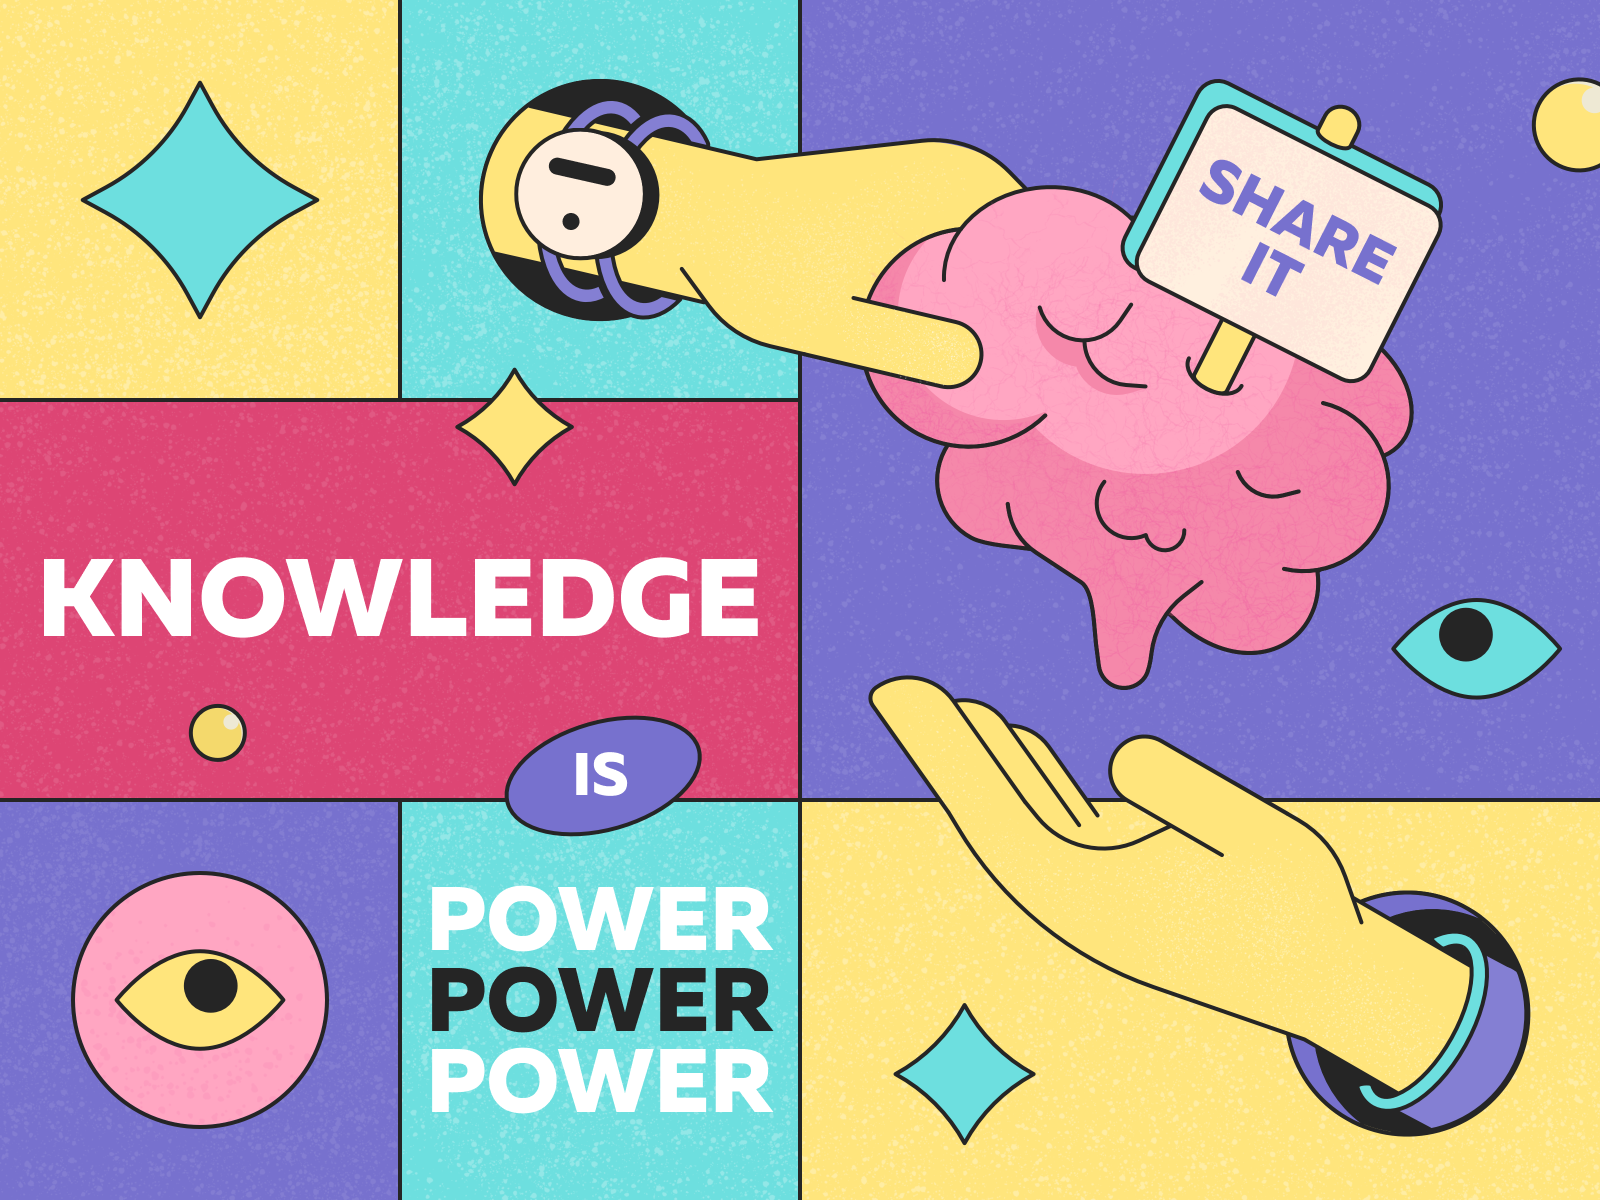 Knowledge is power - Illustration for the Thinkific affinitydesigner brain bright colors colors combinations creative illustration digital illustration education illustrations graphic design illustration knowledge perfect colors perfect pixel texture texture illustration trend illustrations vector illustration yellow